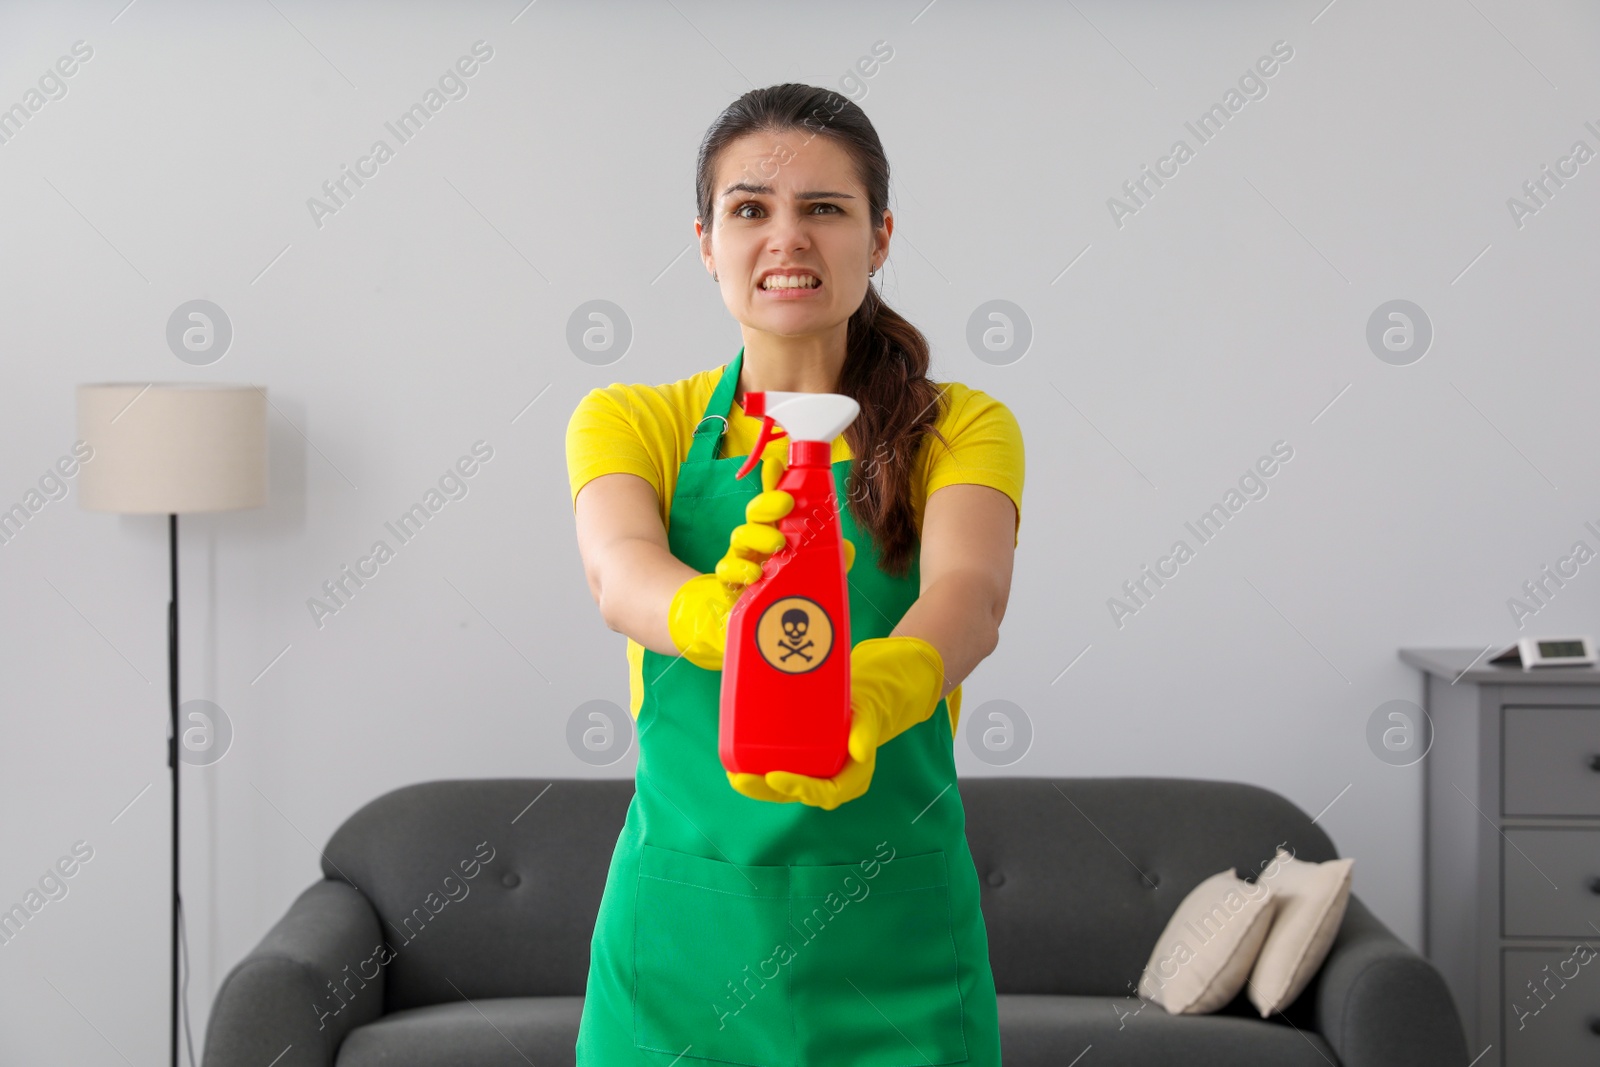 Photo of Woman showing bottle of toxic household chemical with warning sign indoors